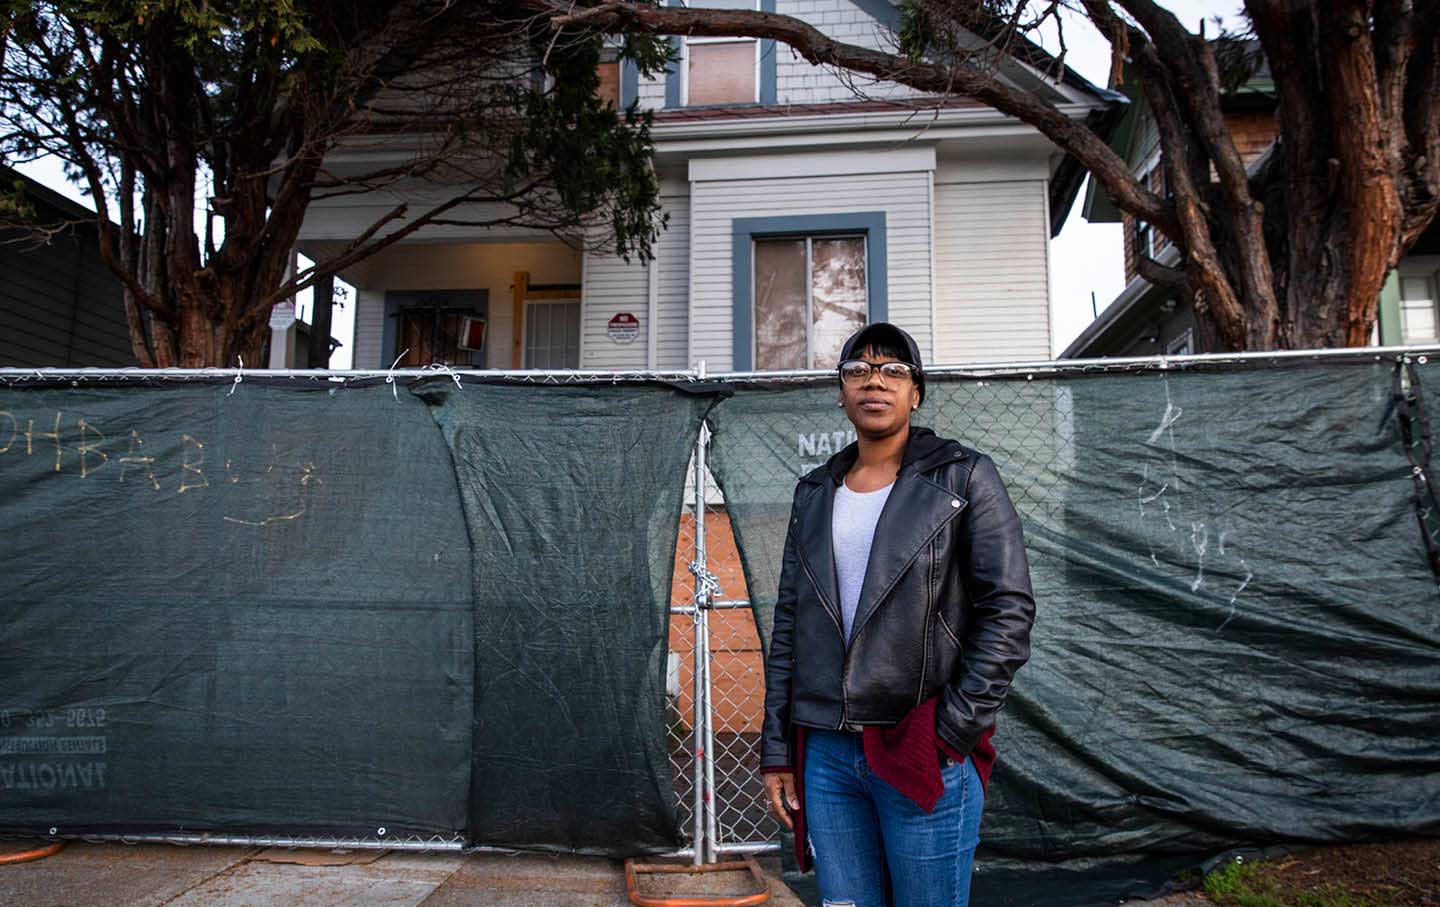 How the Pandemic Threw Fuel on a Growing Housing Movement